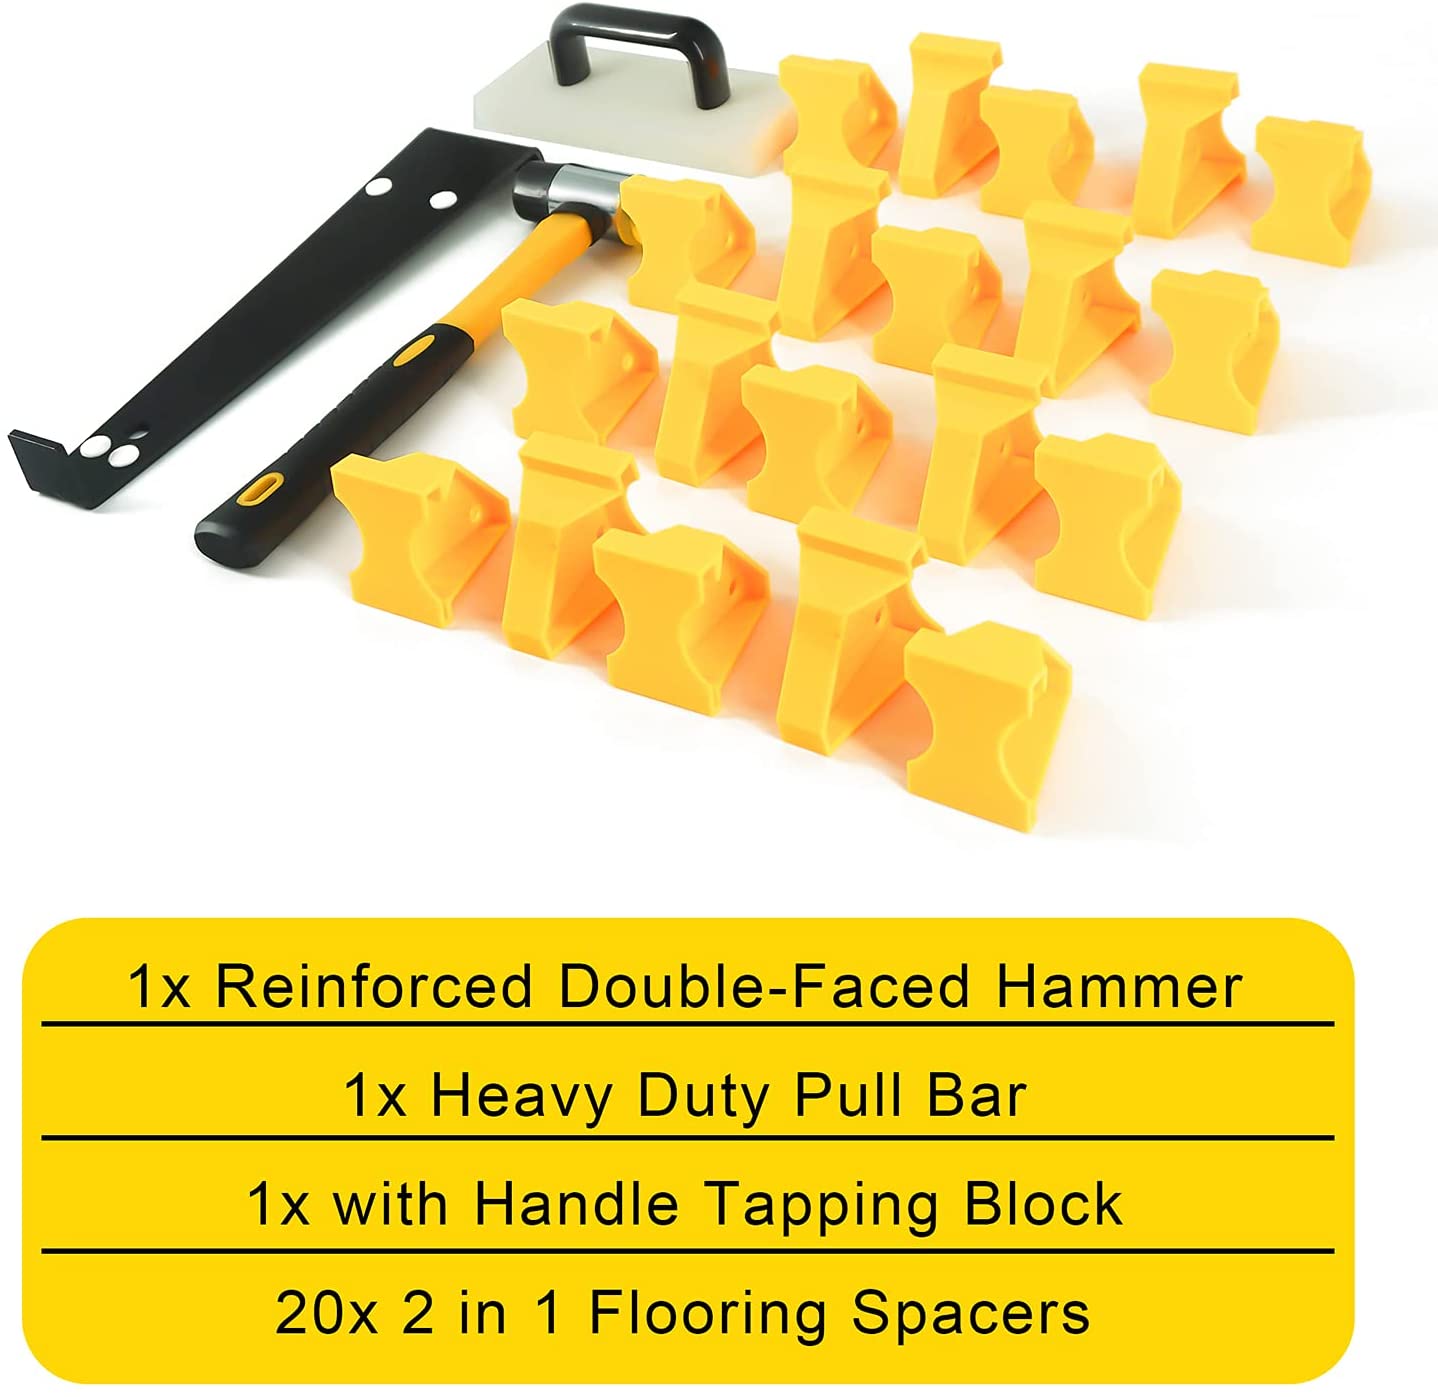 2-in-1-Flooring-Spacer-Kit-Laminate-Wood-Flooring-Tools-Inch-Double-End-Use-Wooden-Floor-Installatio-1882851-14